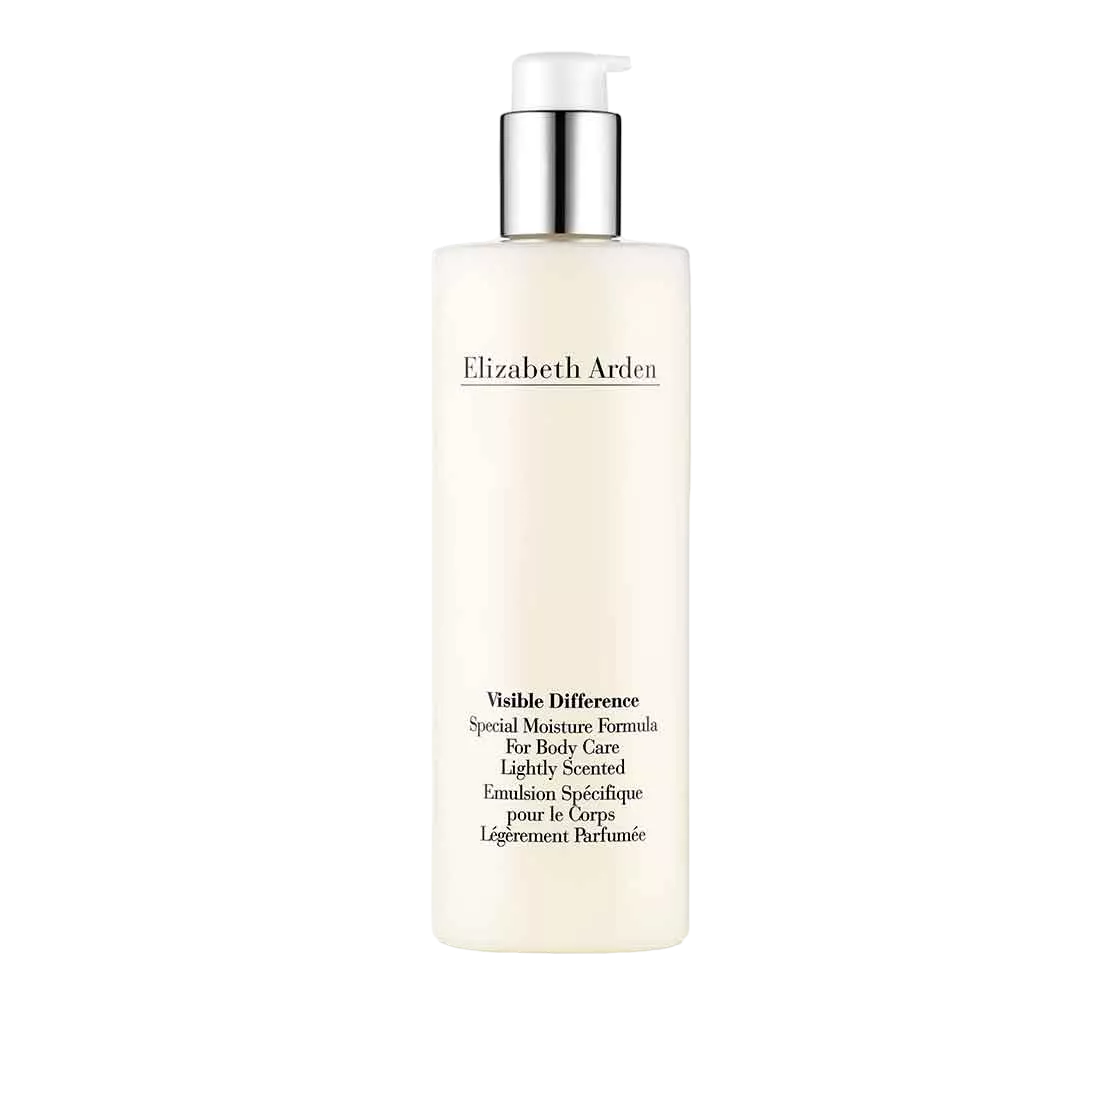 Visible Difference Body Care Lotion